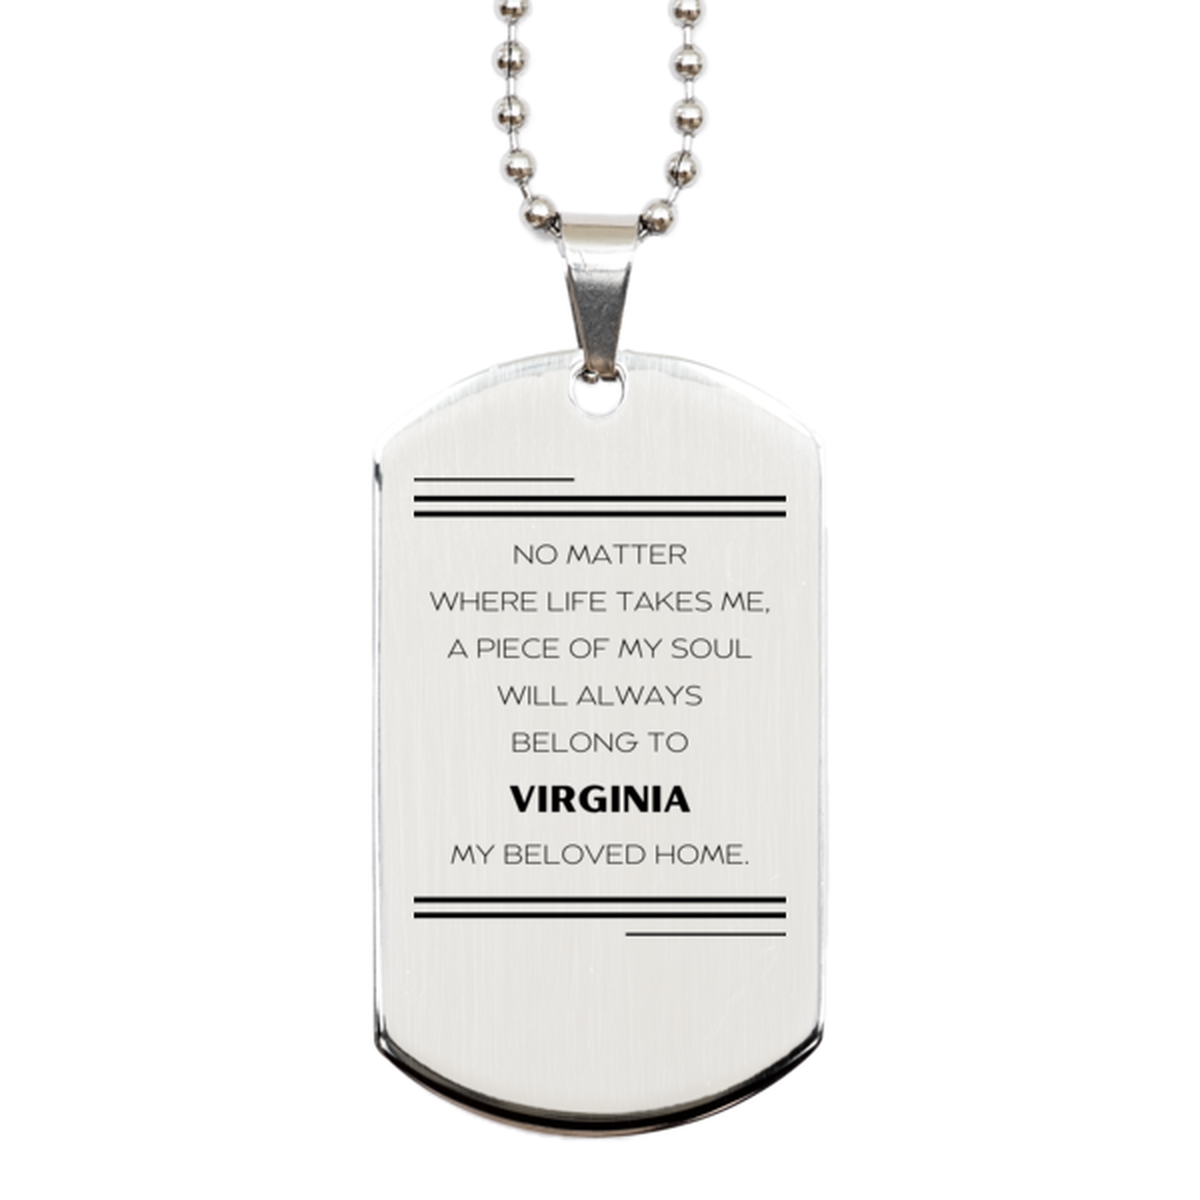 Love Virginia State Gifts, My soul will always belong to Virginia, Proud Silver Dog Tag, Birthday Unique Gifts For Virginia Men, Women, Friends